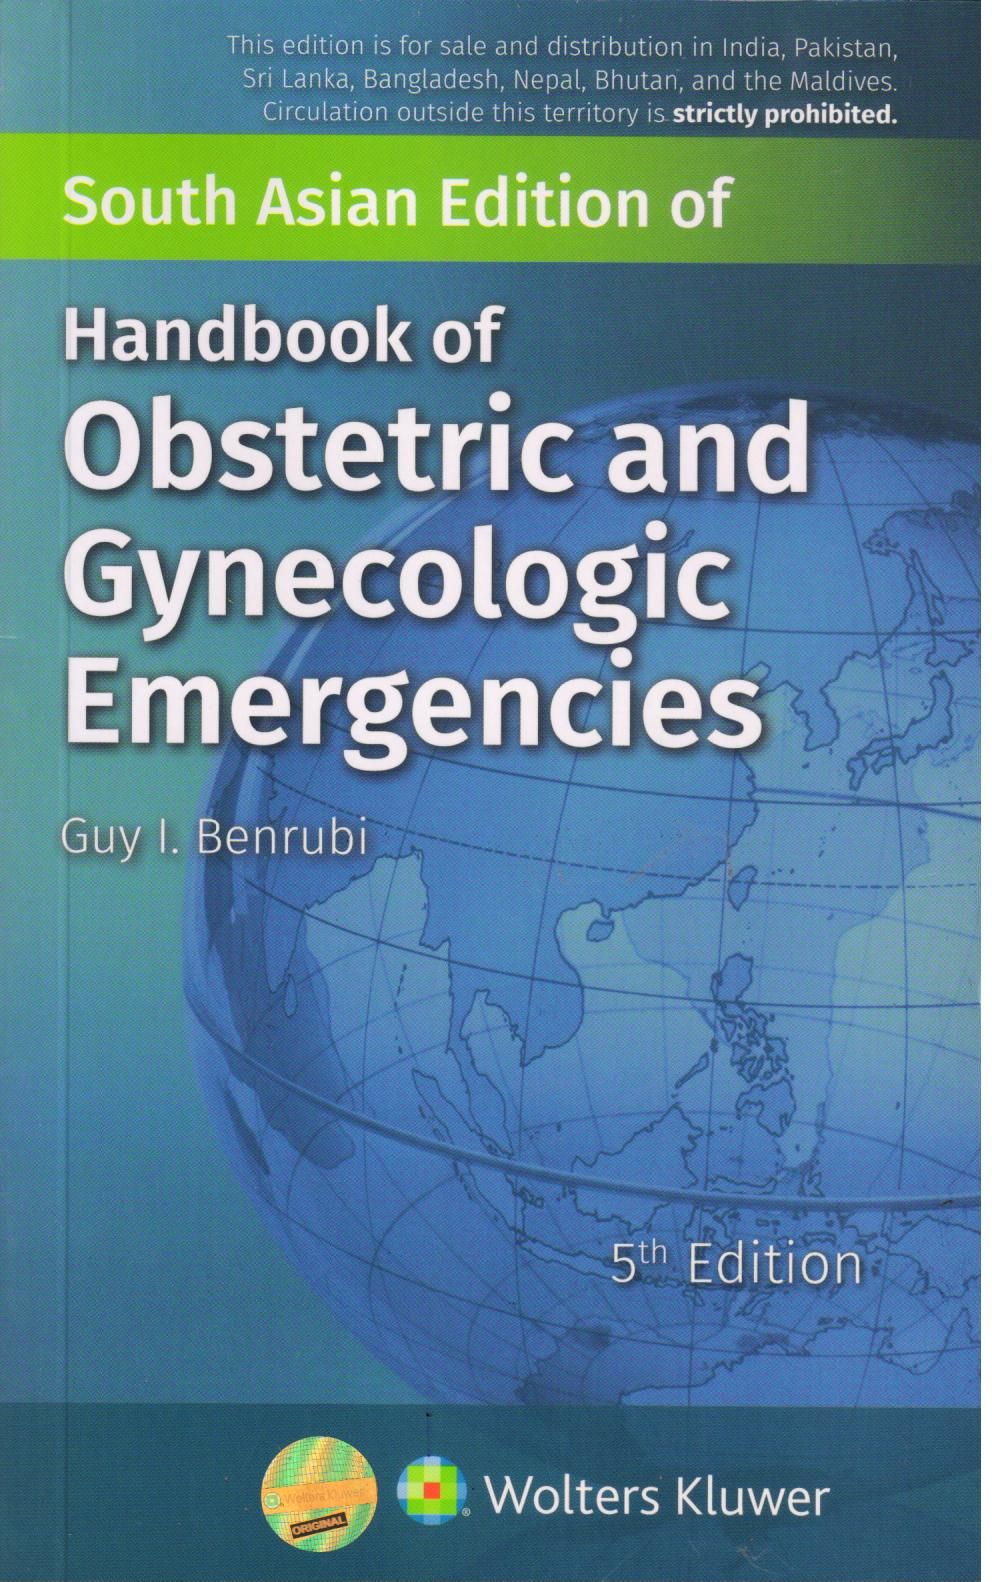 

surgical-sciences/obstetrics-and-gynecology/handbook-of-obstetric-and-gynecologic-emergencies-9789388696647